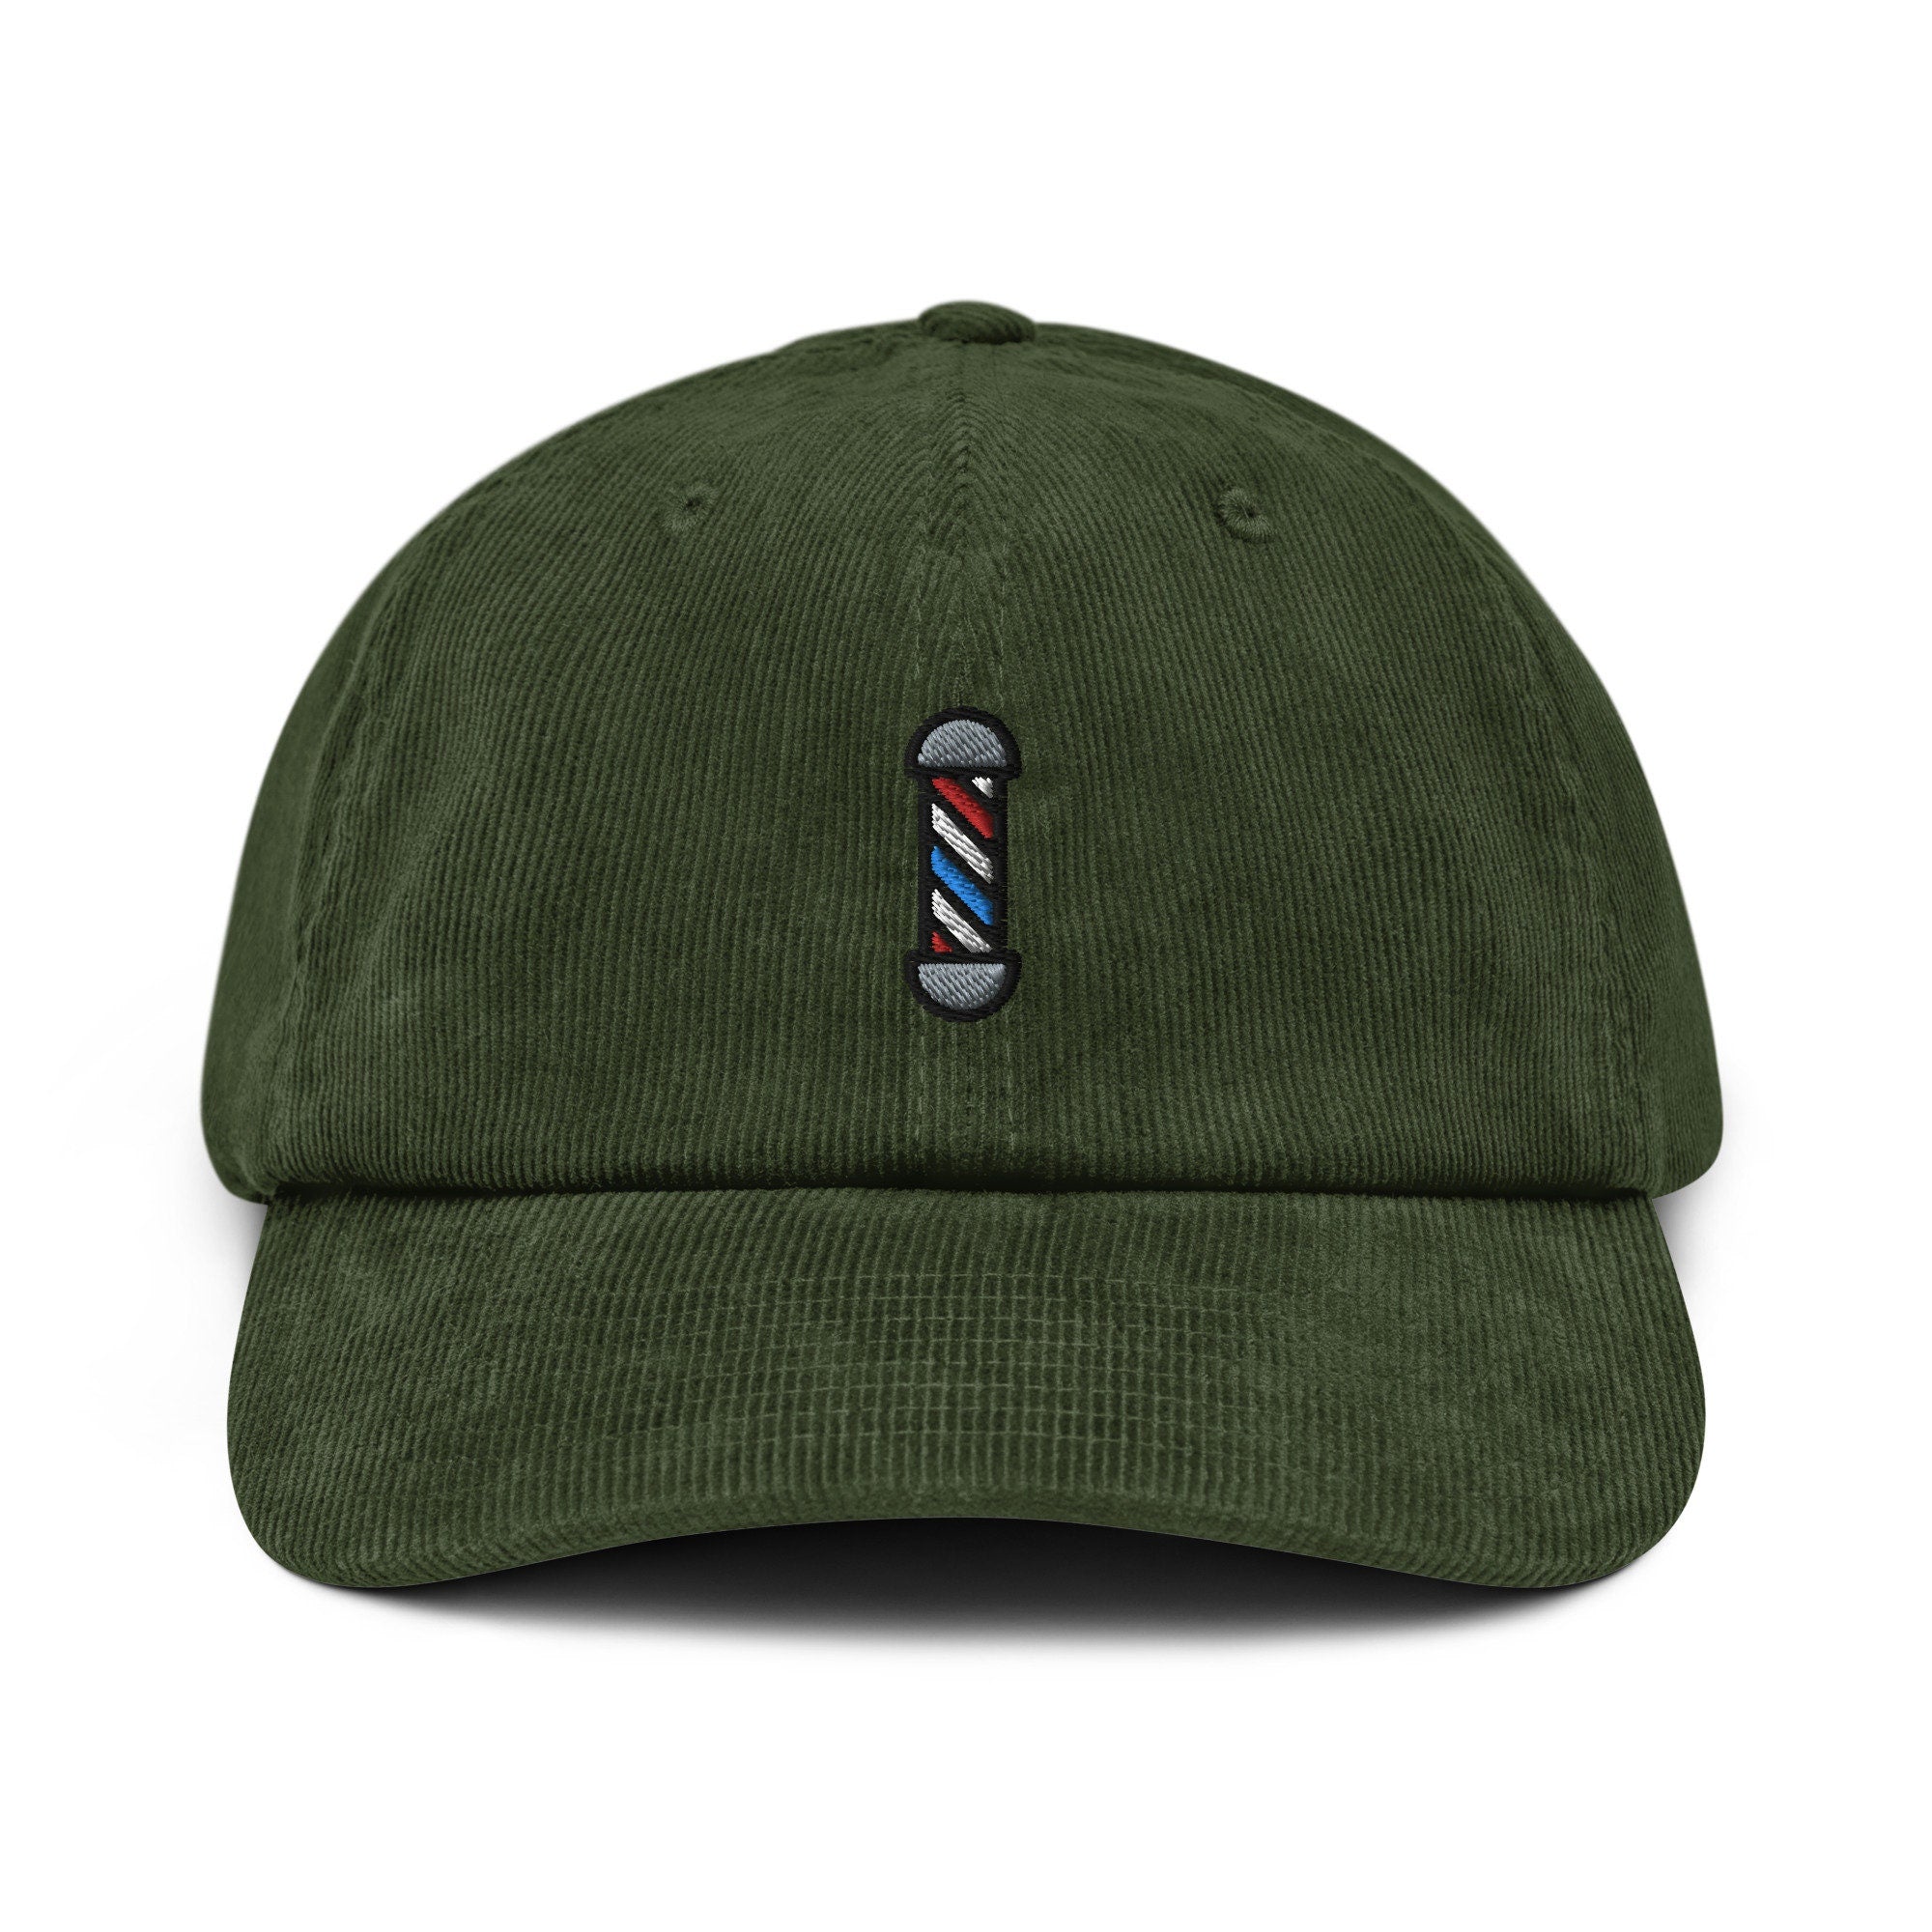 Barber Pole Corduroy Hat, Handmade Embroidered Corduroy Dad Cap - Multiple Colors